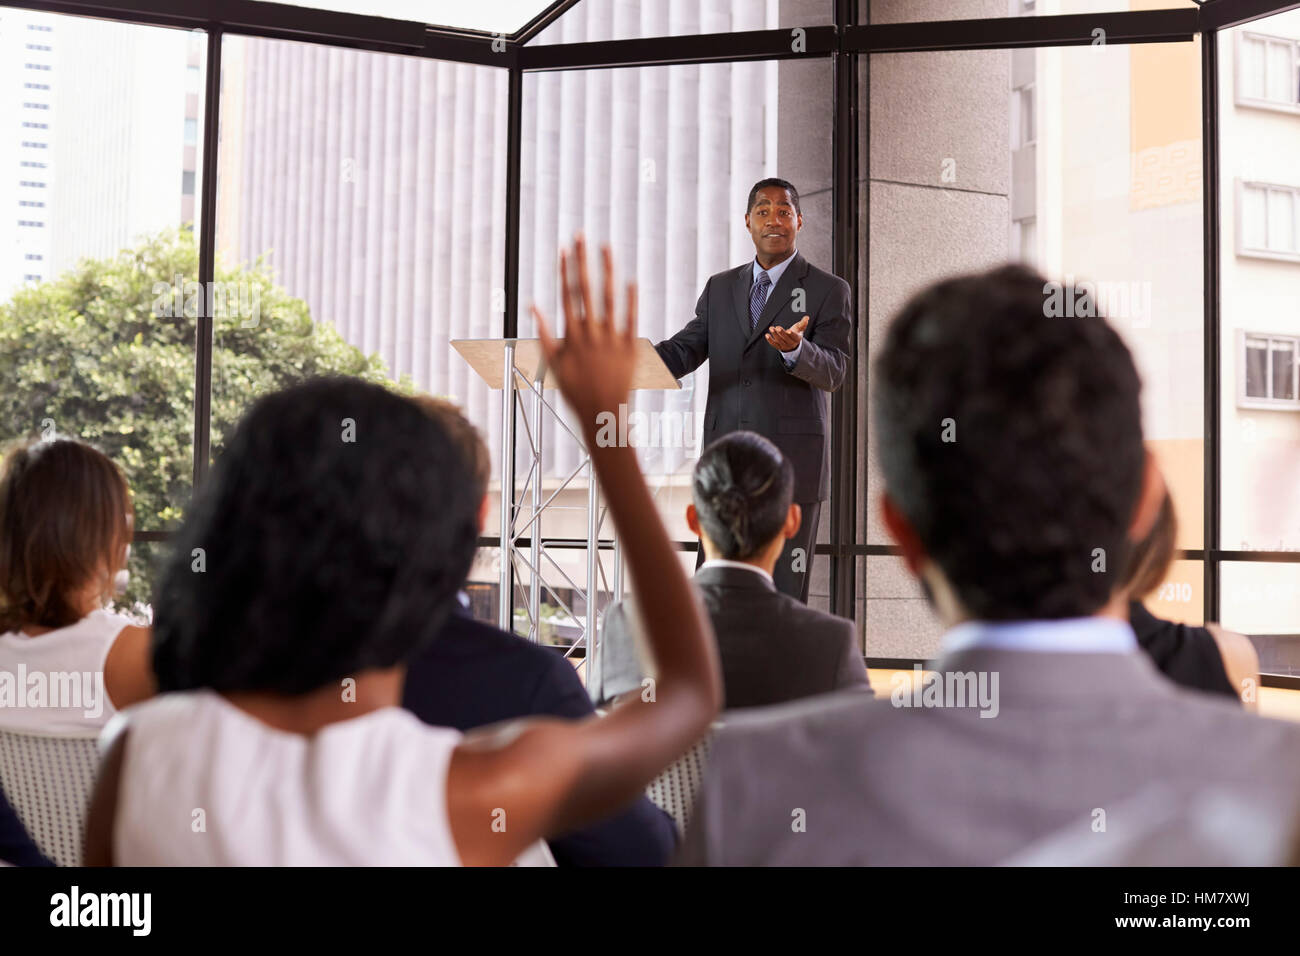 Black businessman giving seminar takes audience questions Stock Photo